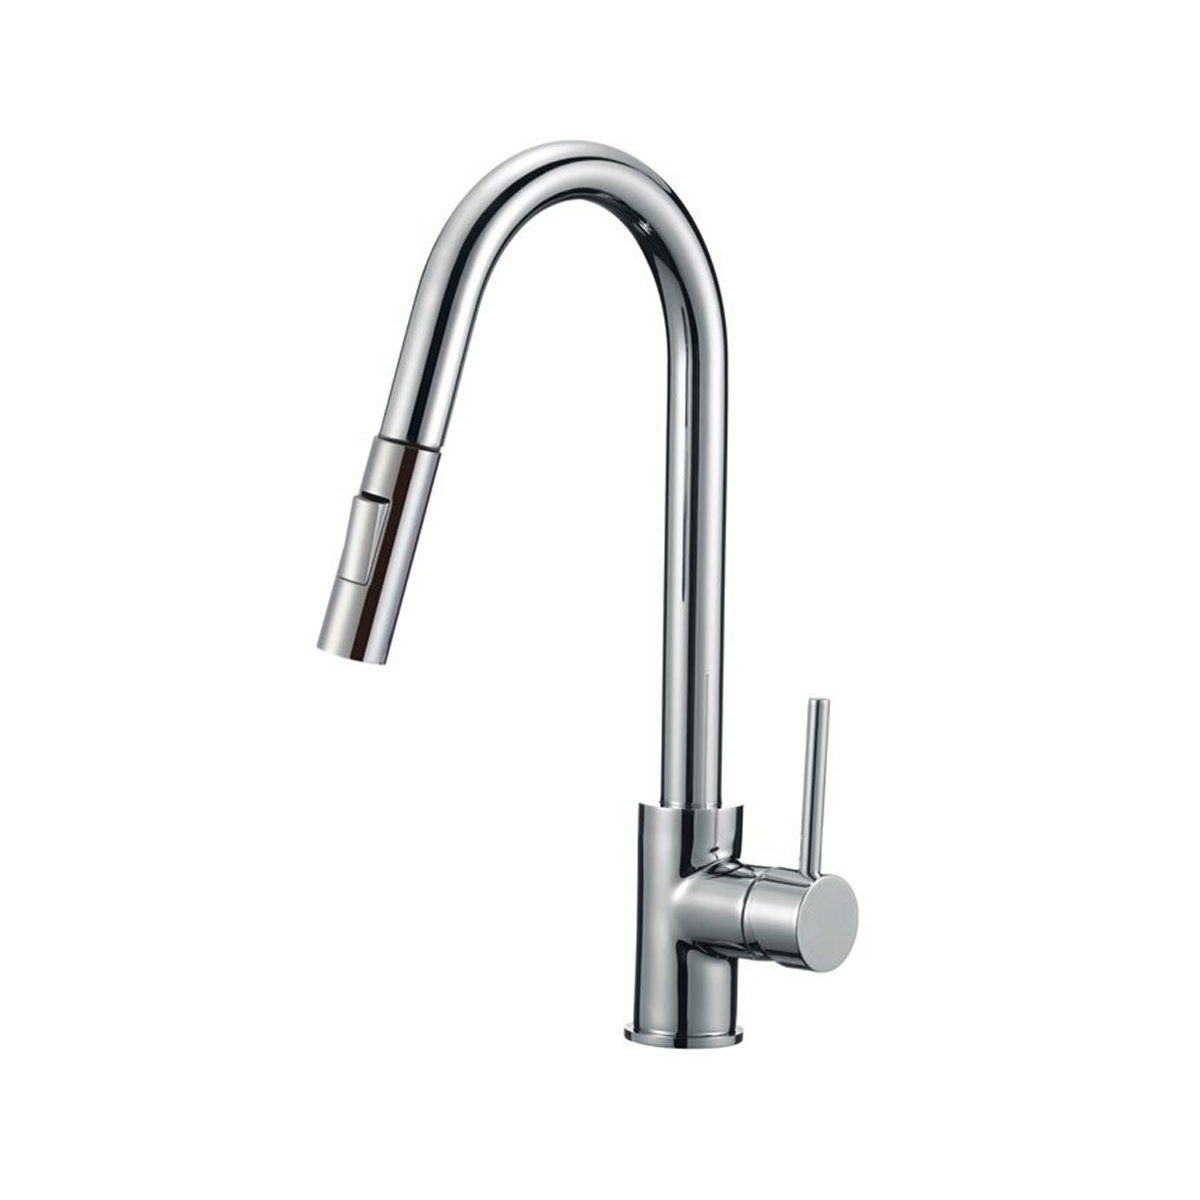 Pelican Int'l Fountain Series PL-8231 Single Hole Pull Down Kitchen Faucet In Brushed Nickel